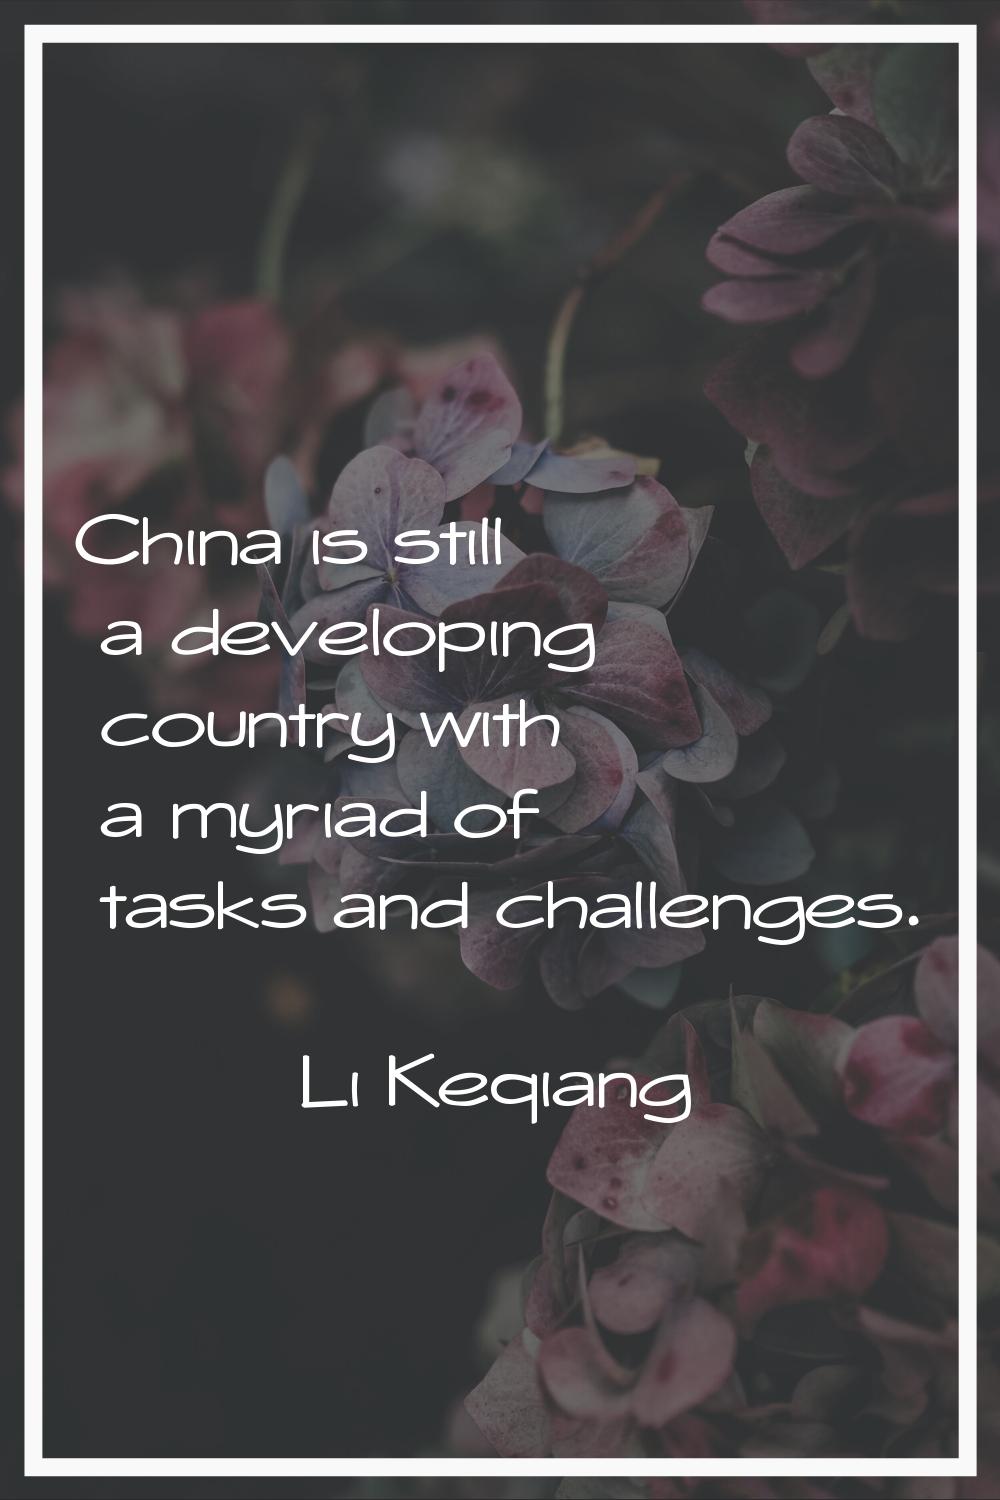 China is still a developing country with a myriad of tasks and challenges.